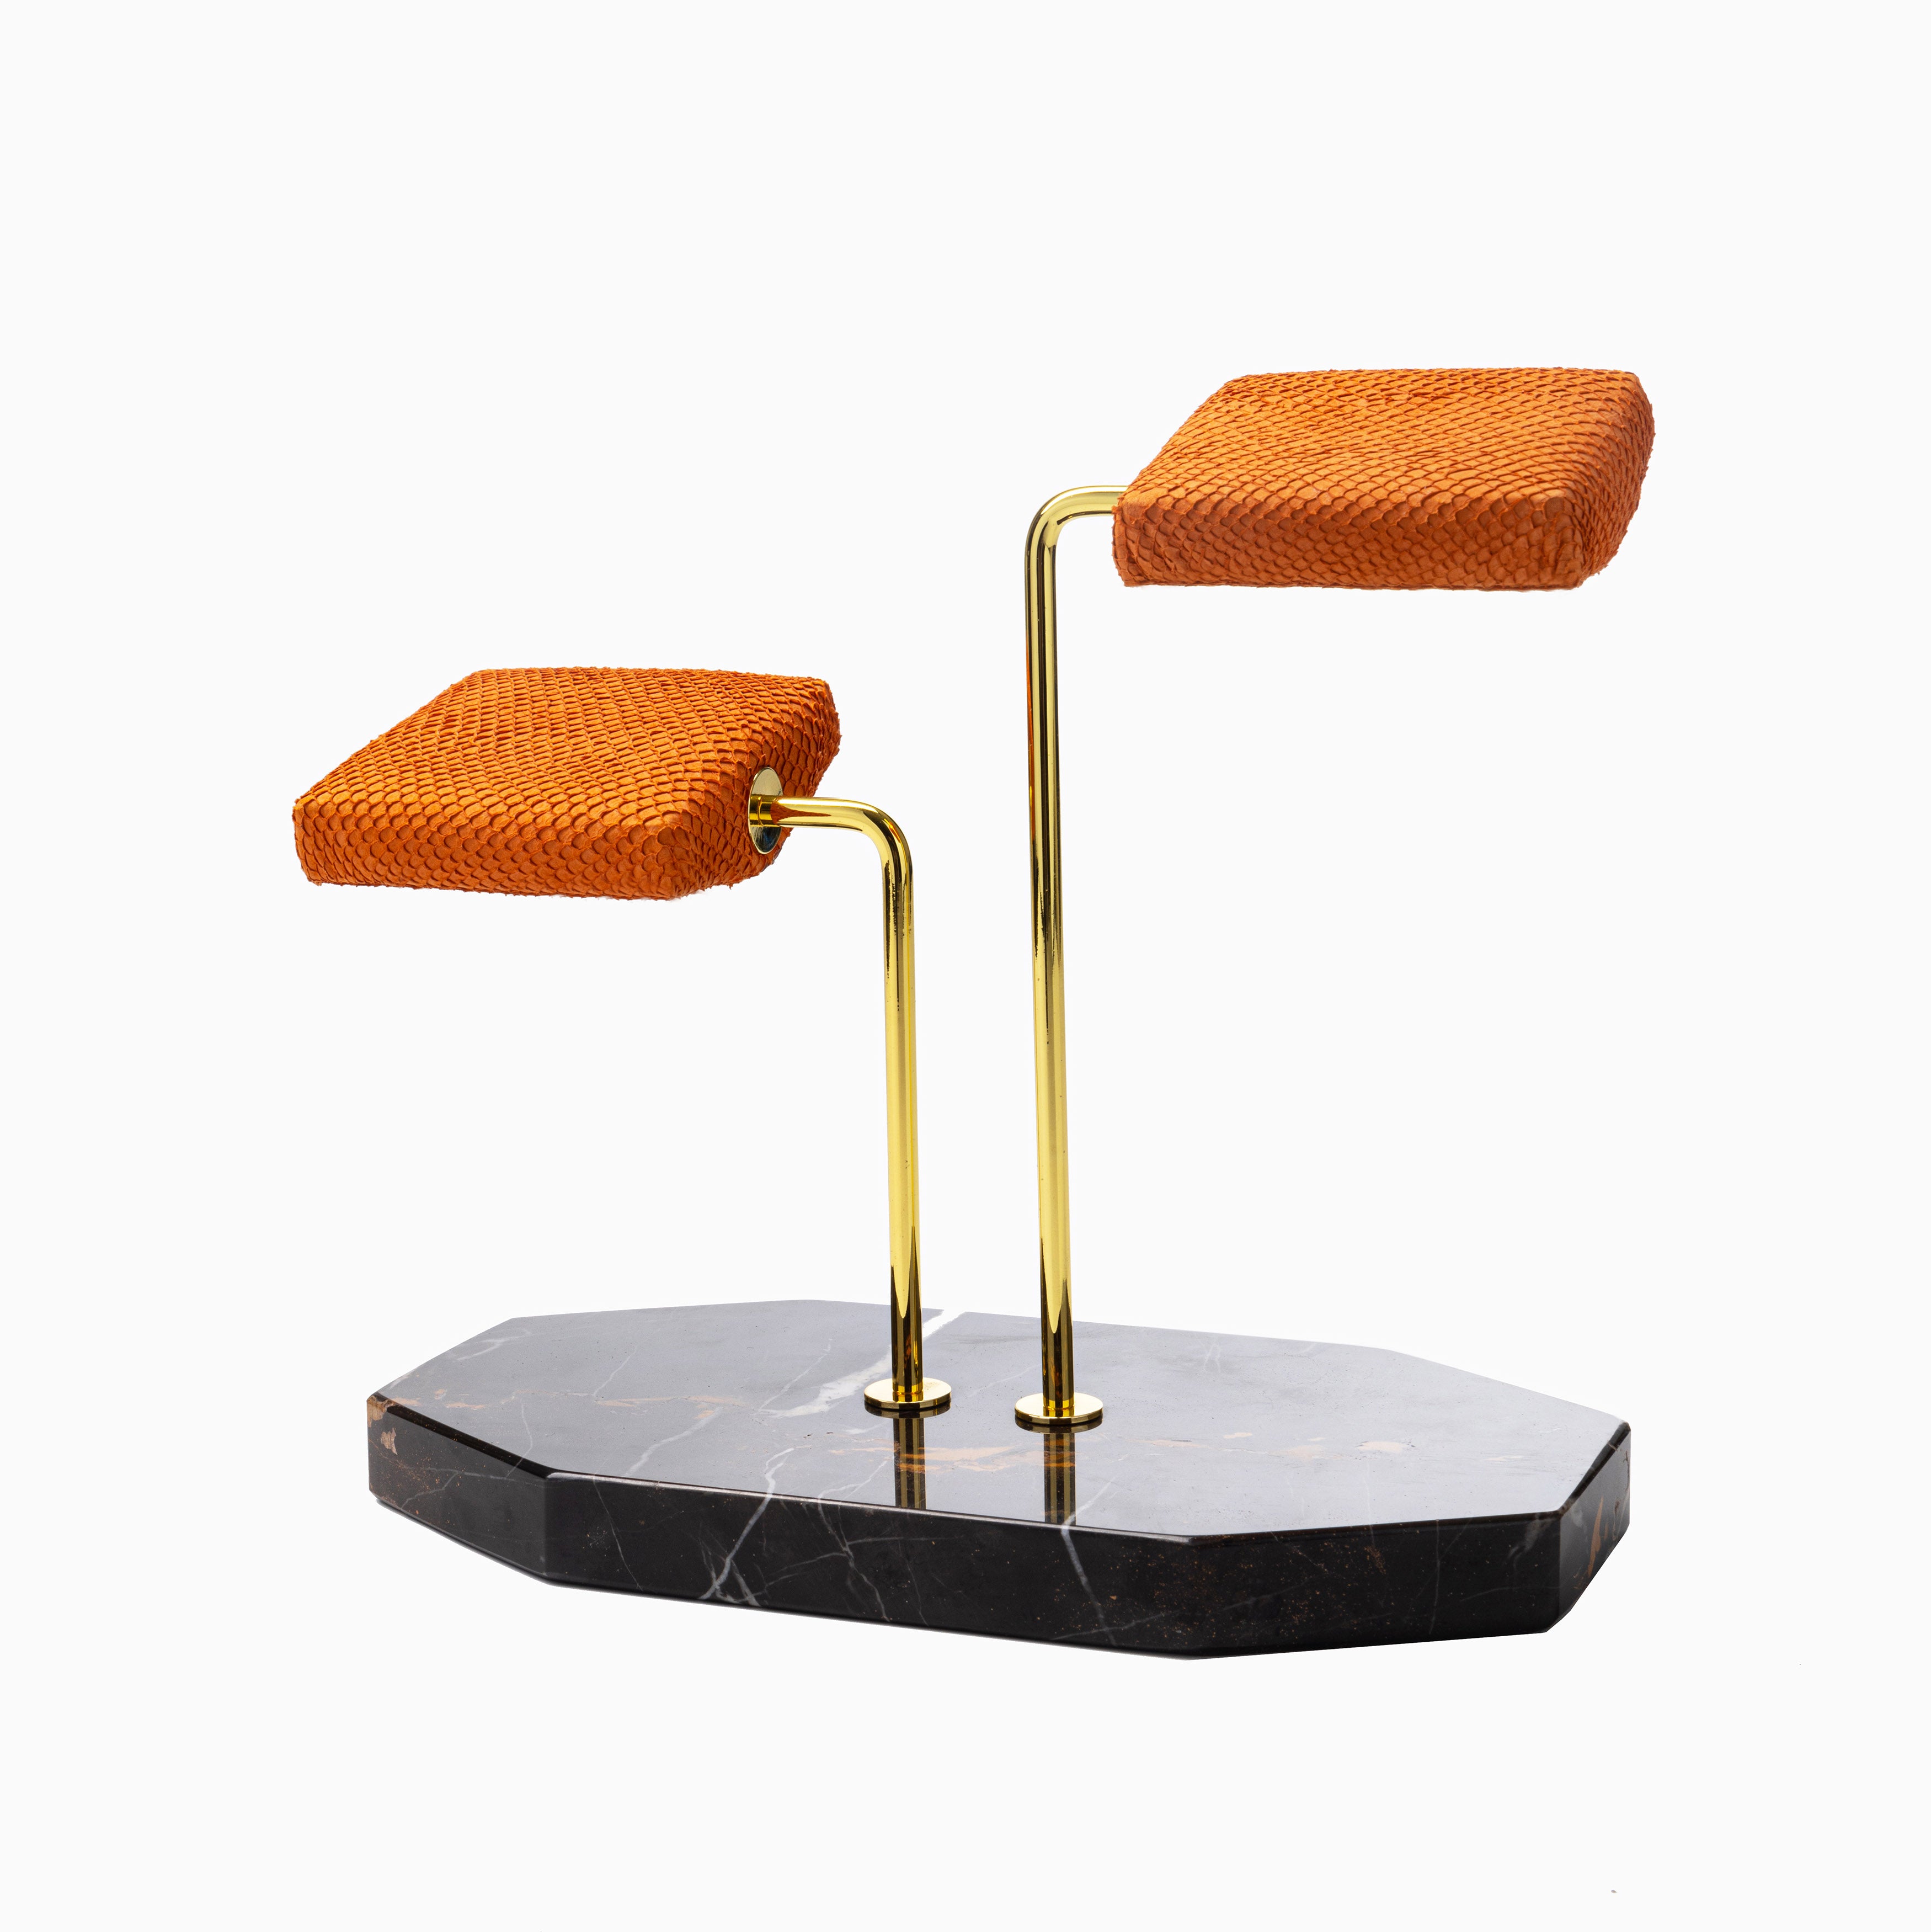 Dual Watch Stand - Orange Salmon (Limited Edition)